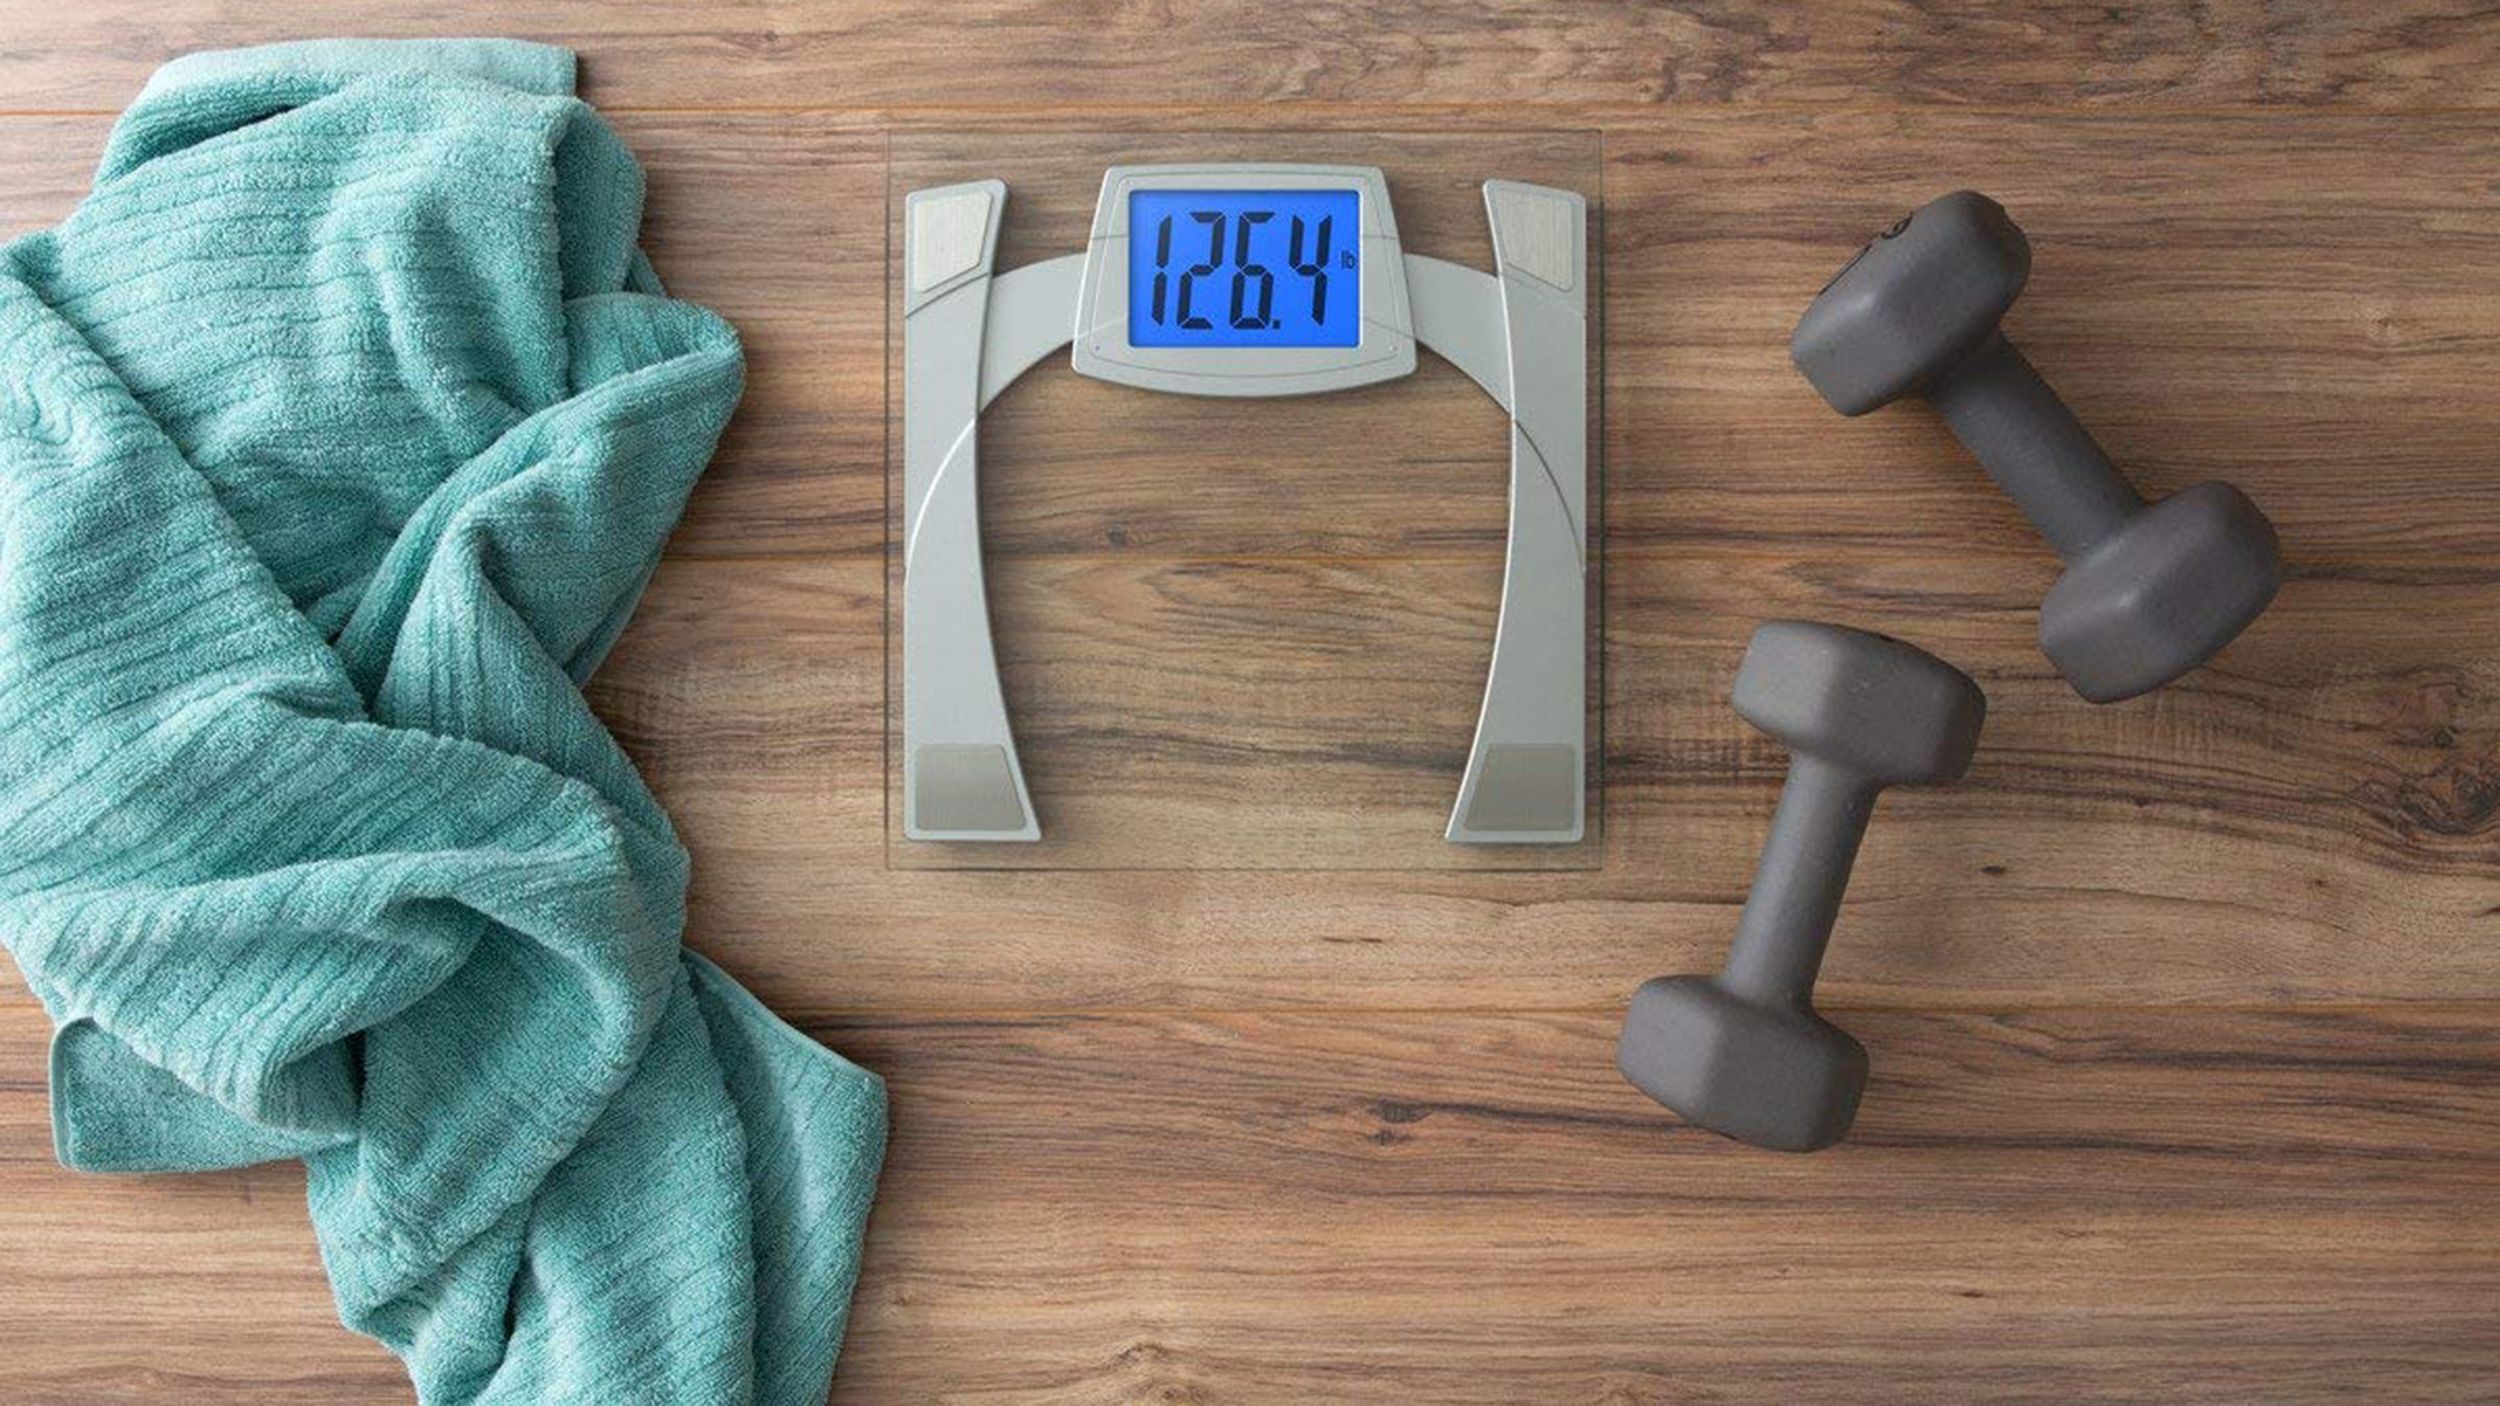 Step up to Scale Back with fabulous new bathroom scales 